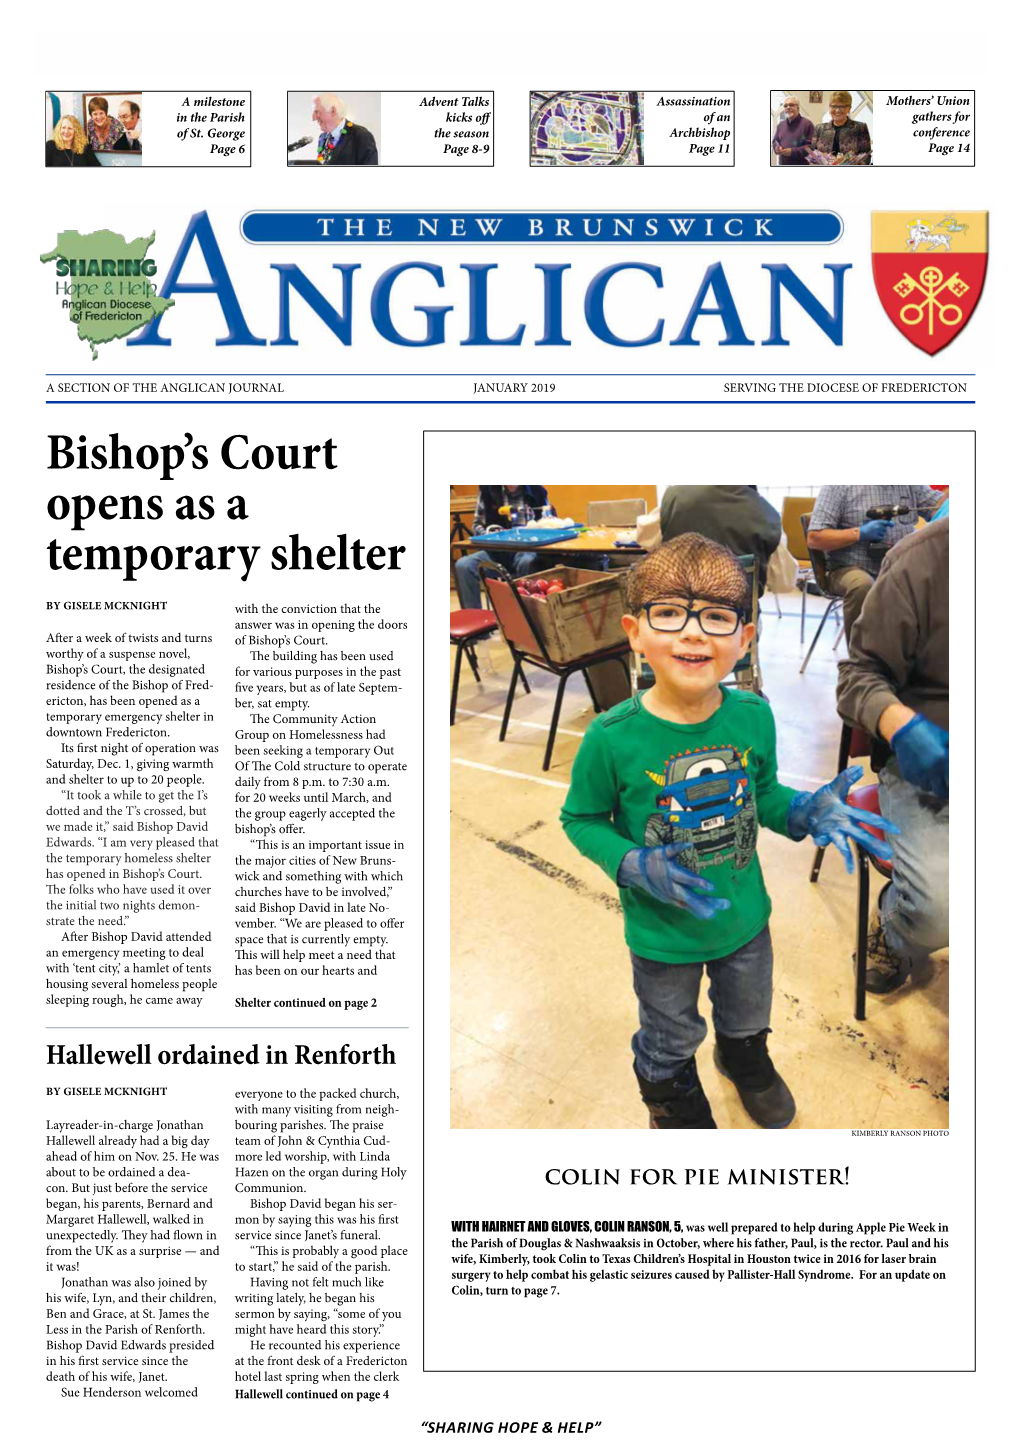 Bishop's Court Opens As a Temporary Shelter